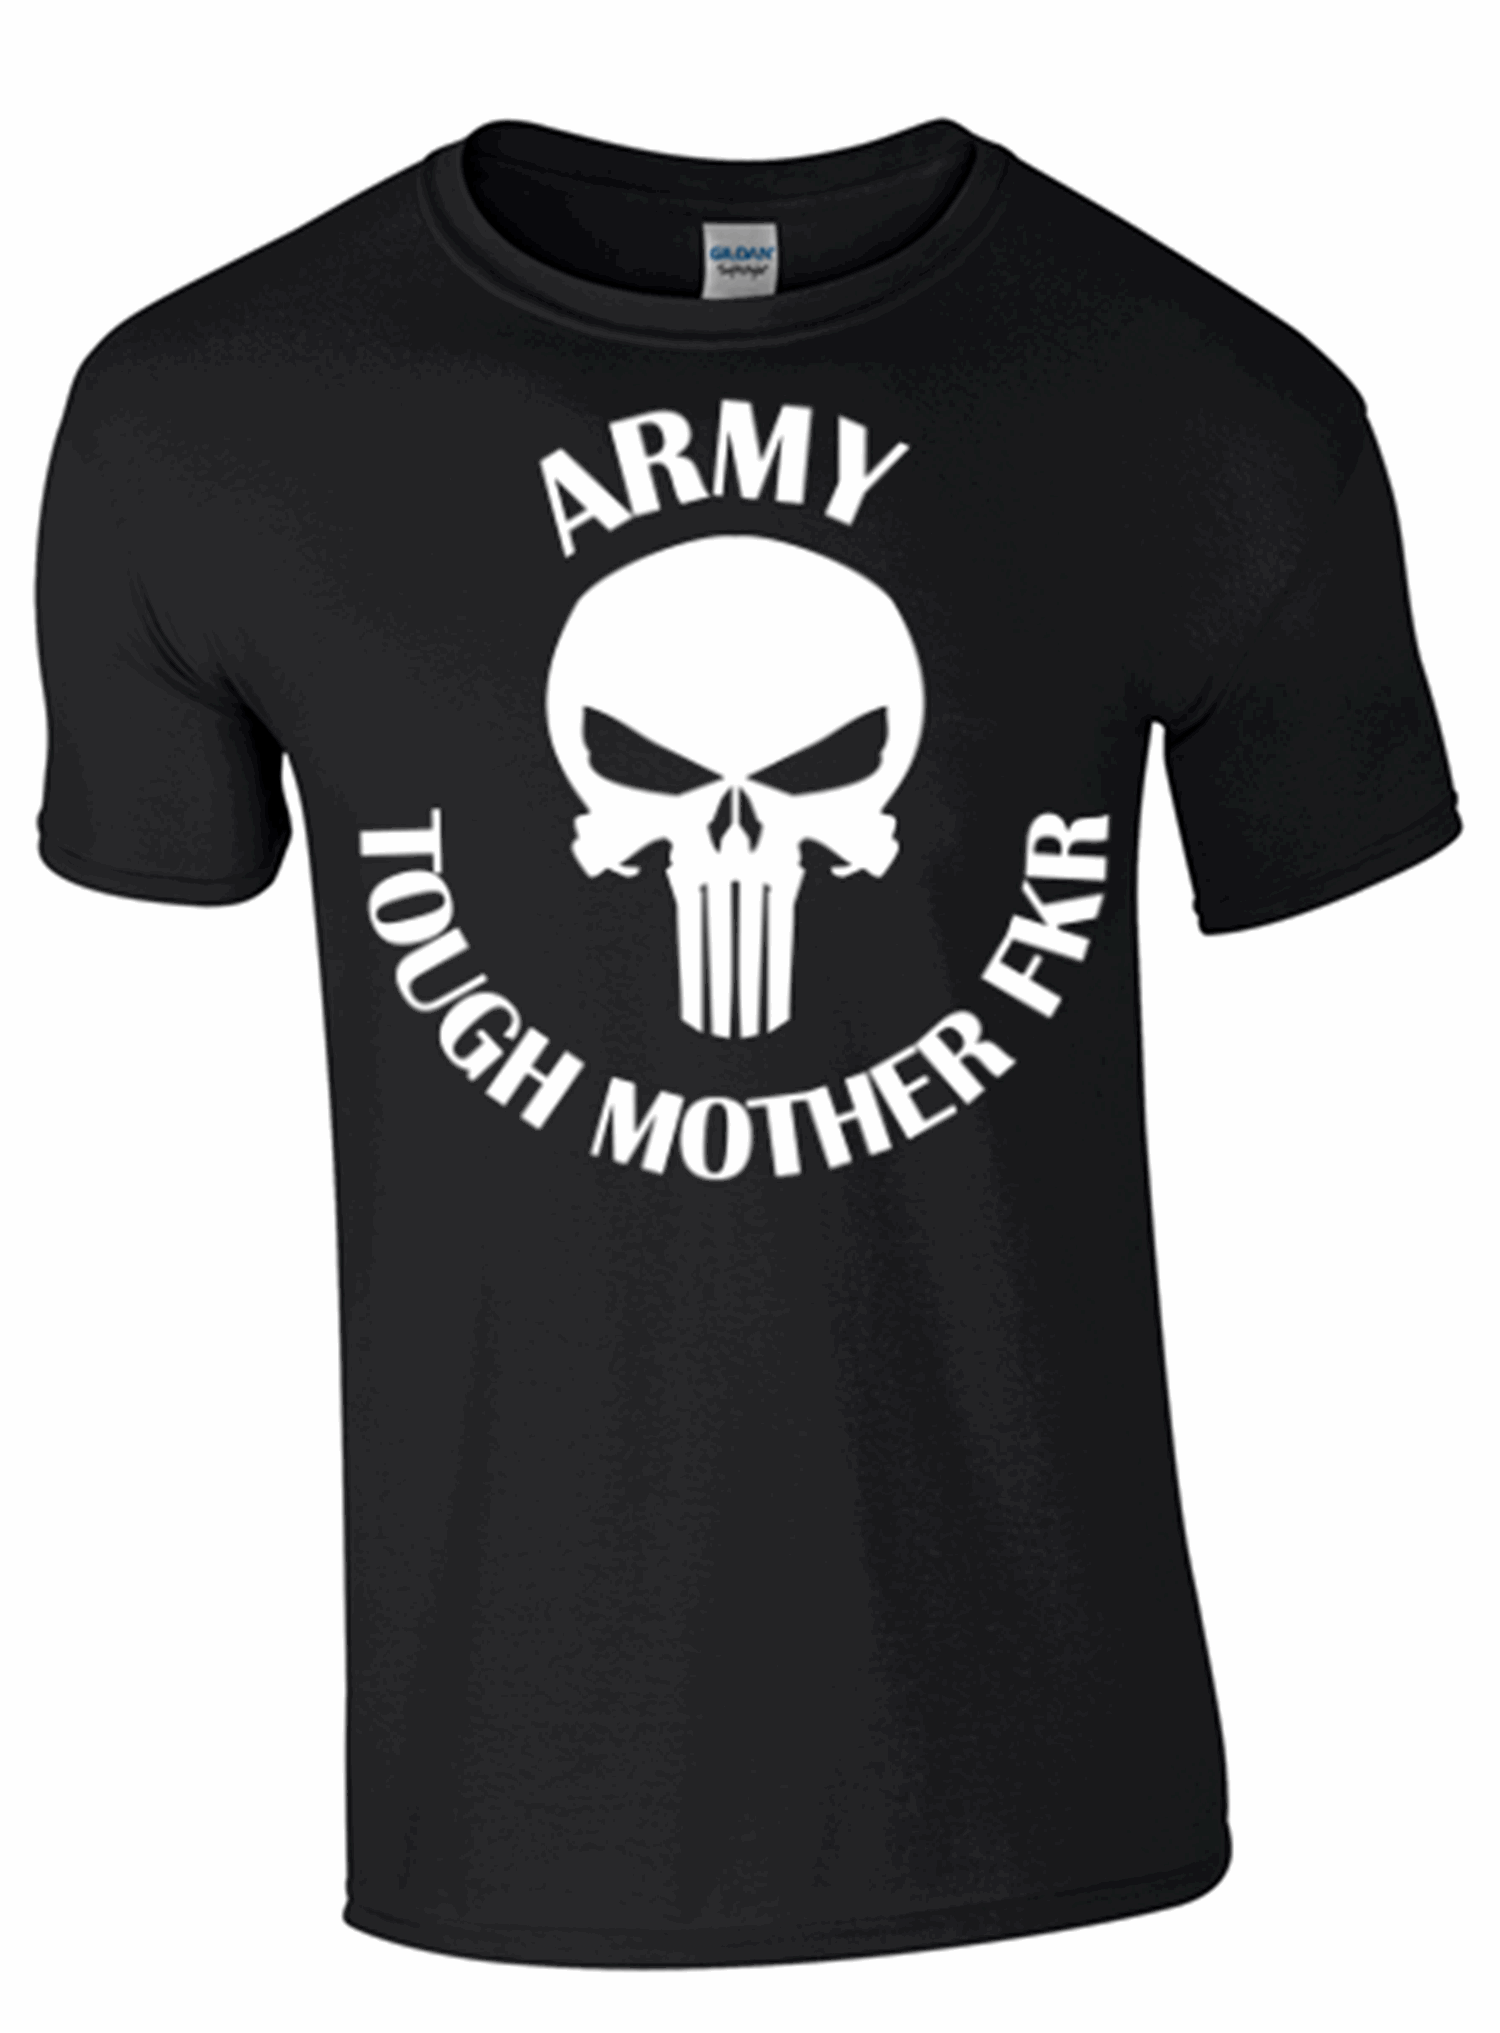 Army Tough Mother FKR T-Shirt - Army 1157 kit Black / L Army 1157 Kit Veterans Owned Business